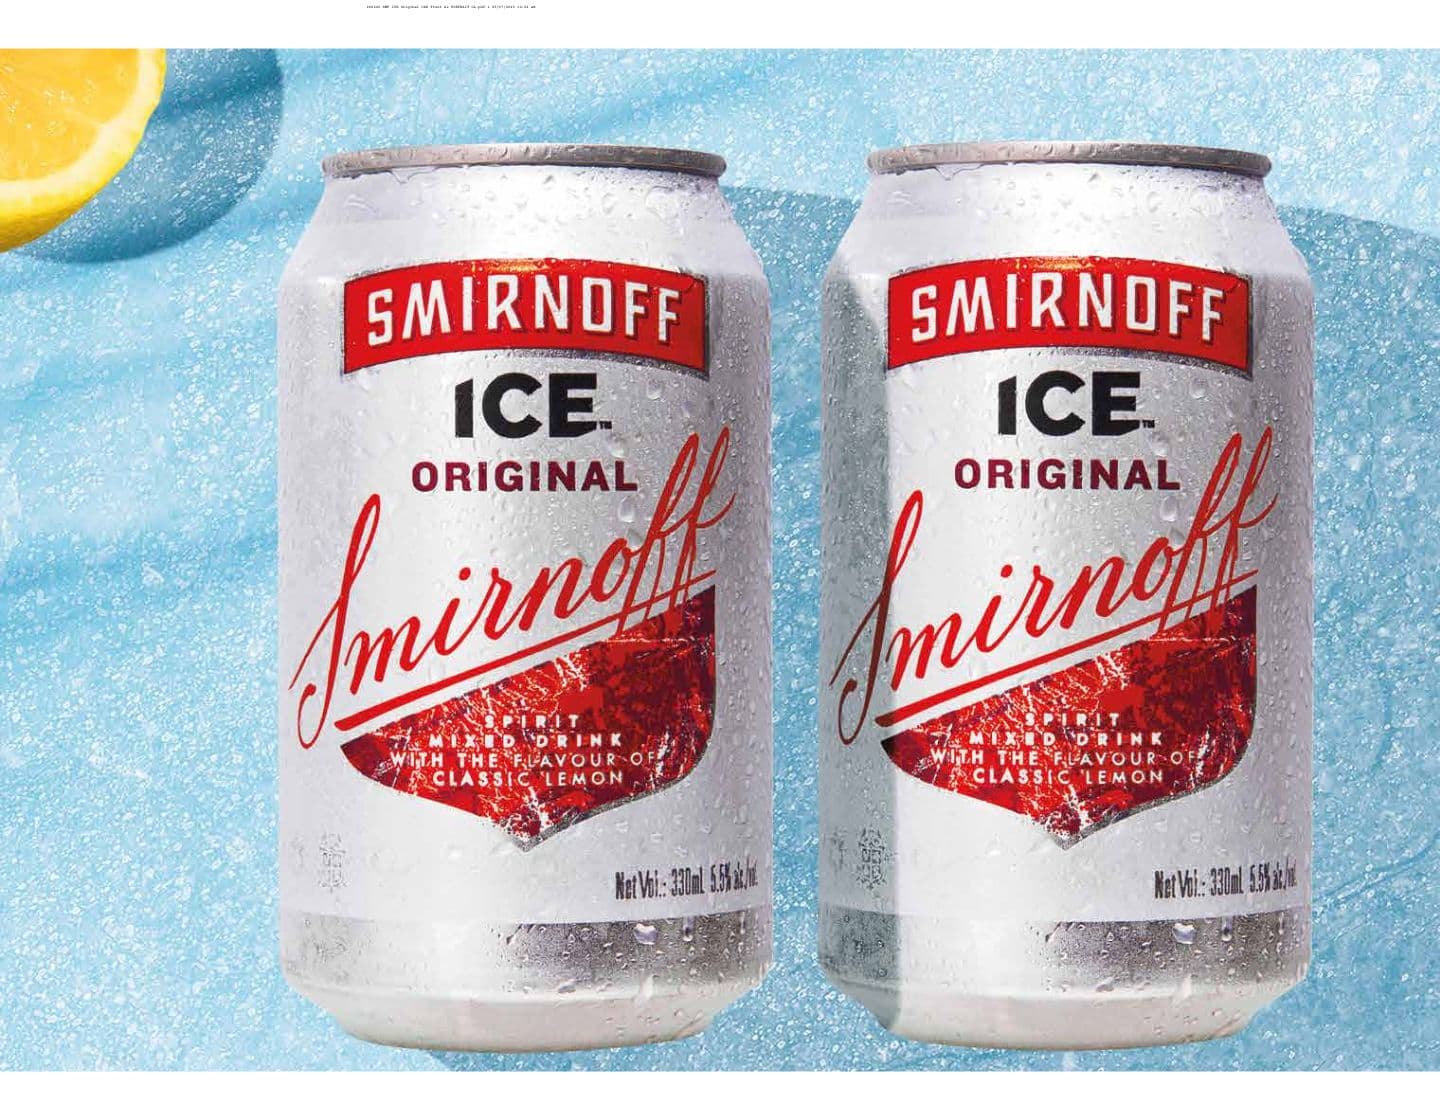 Two cans of Smirnoff Ice on a blue background